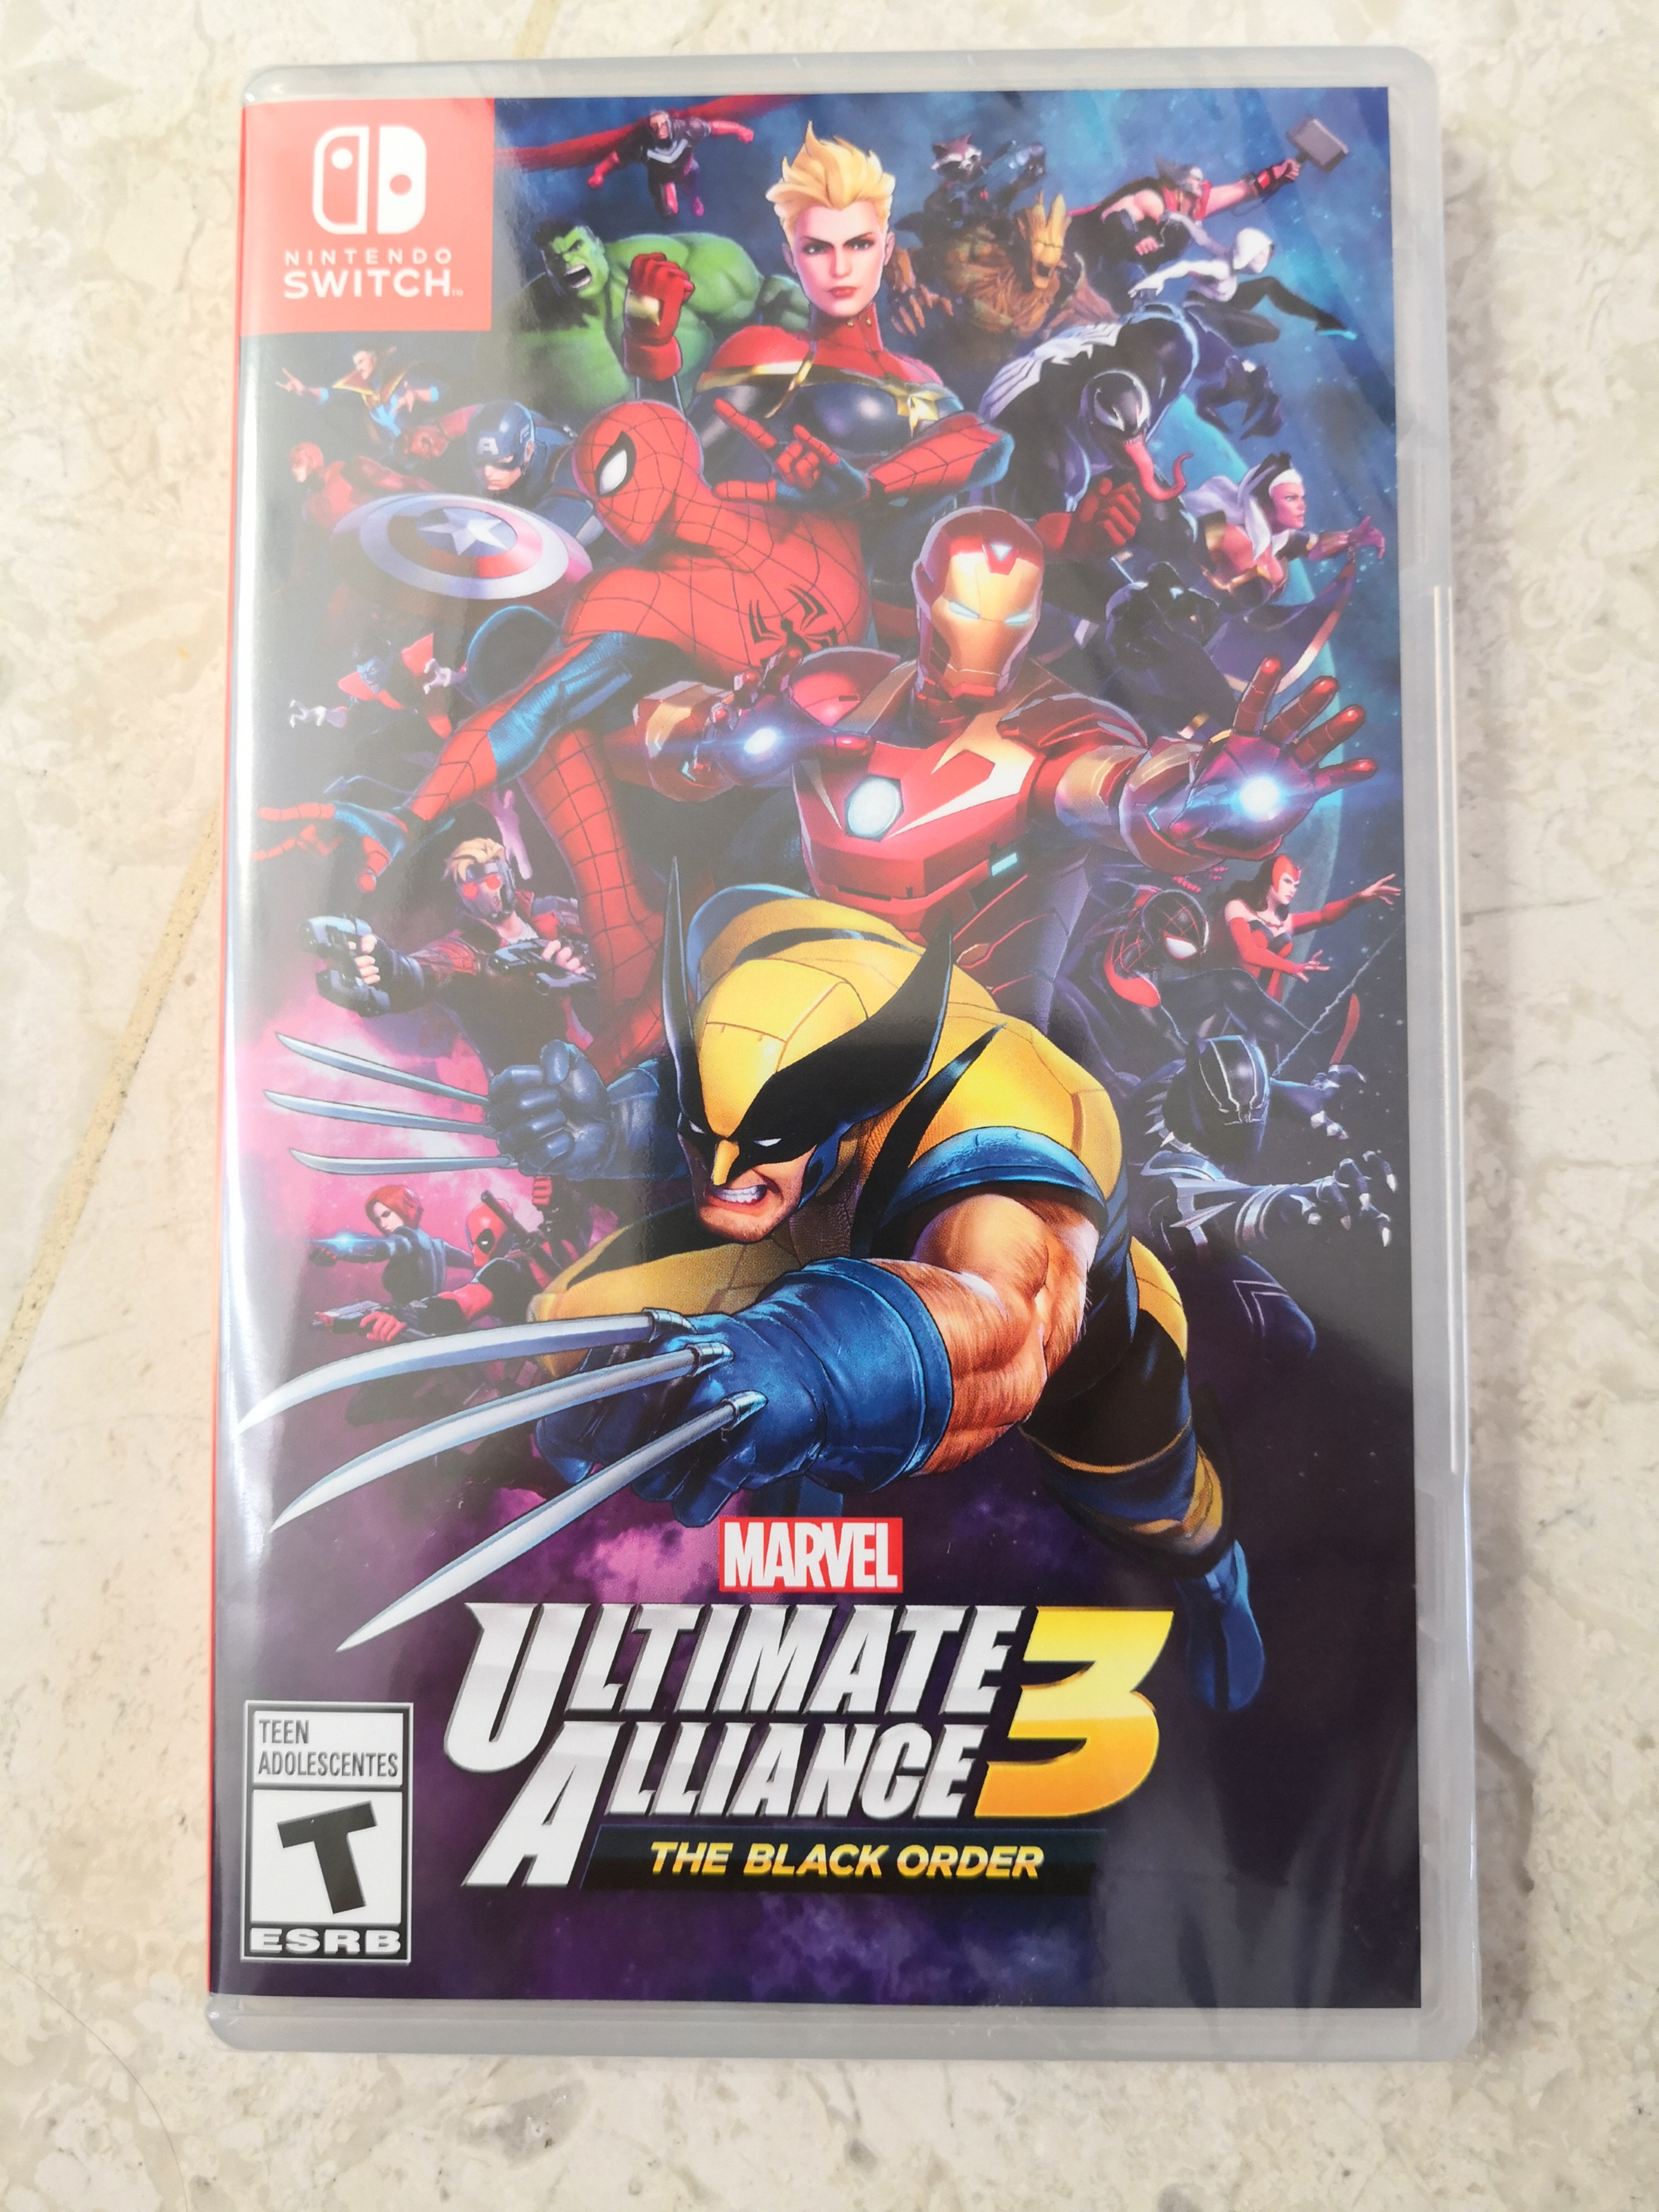 switch ultimate alliance